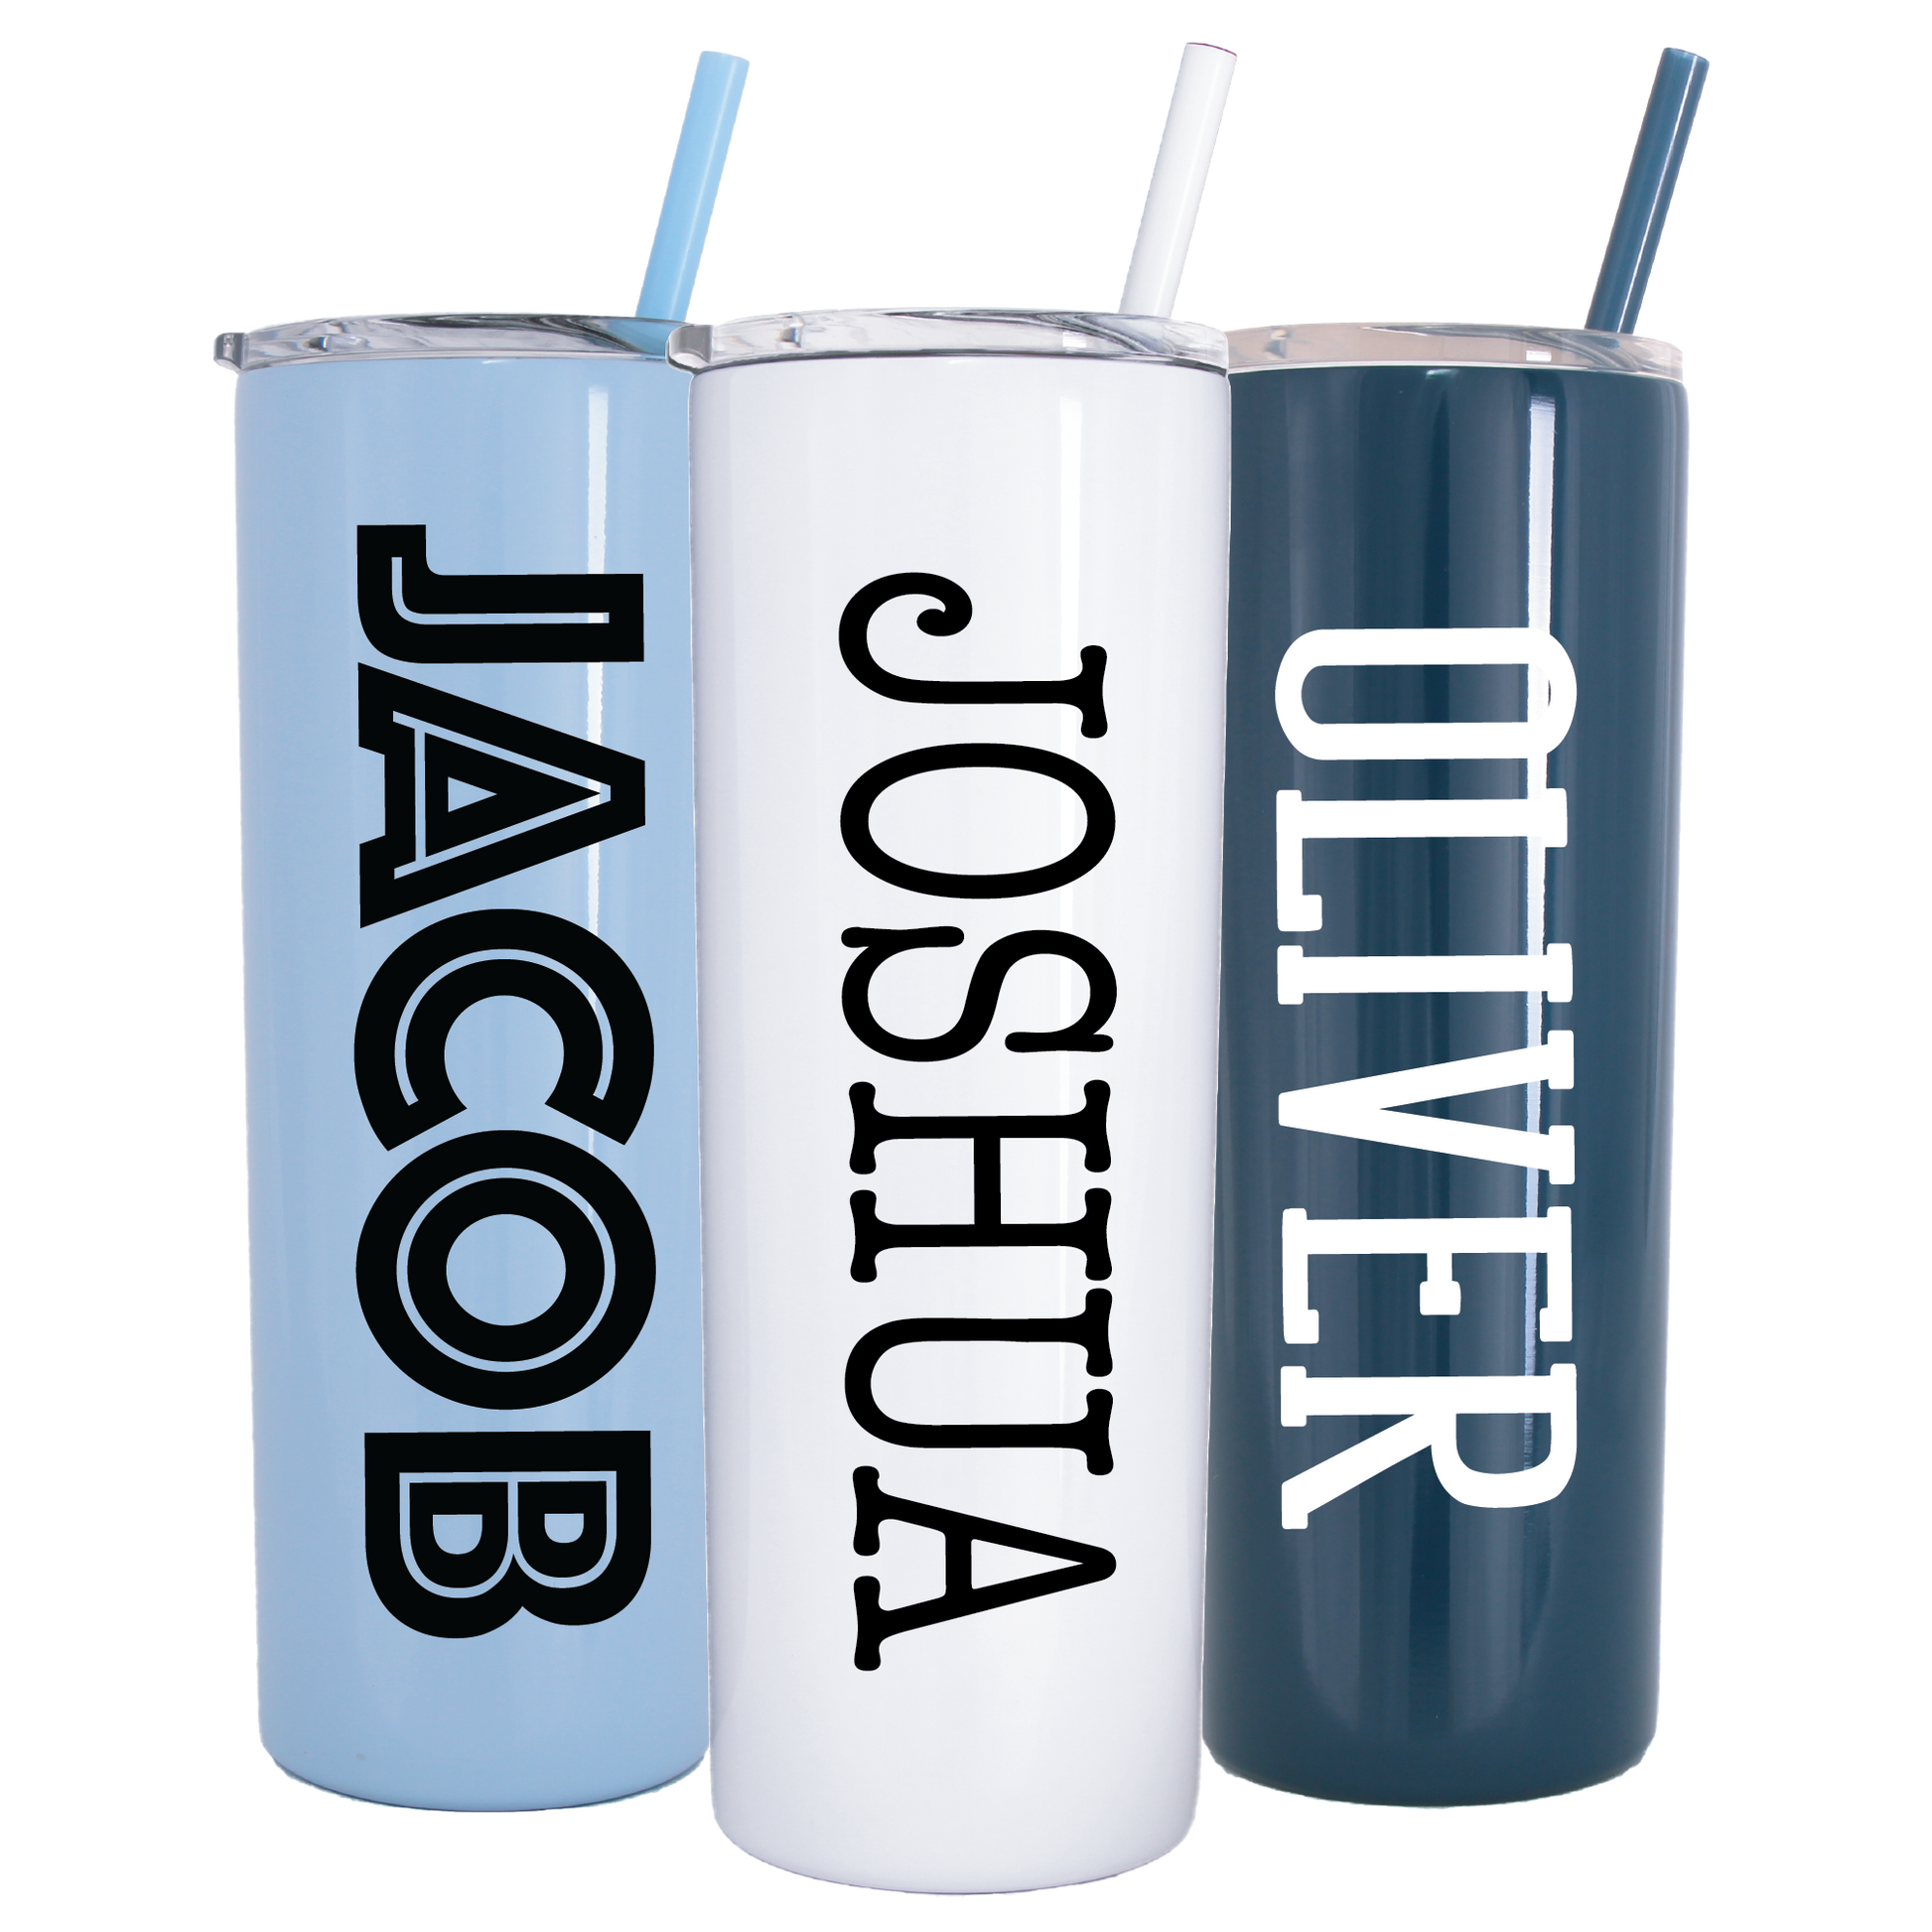 20oz Stainless Steel Tumblers, Personalized/Custom Tumblers